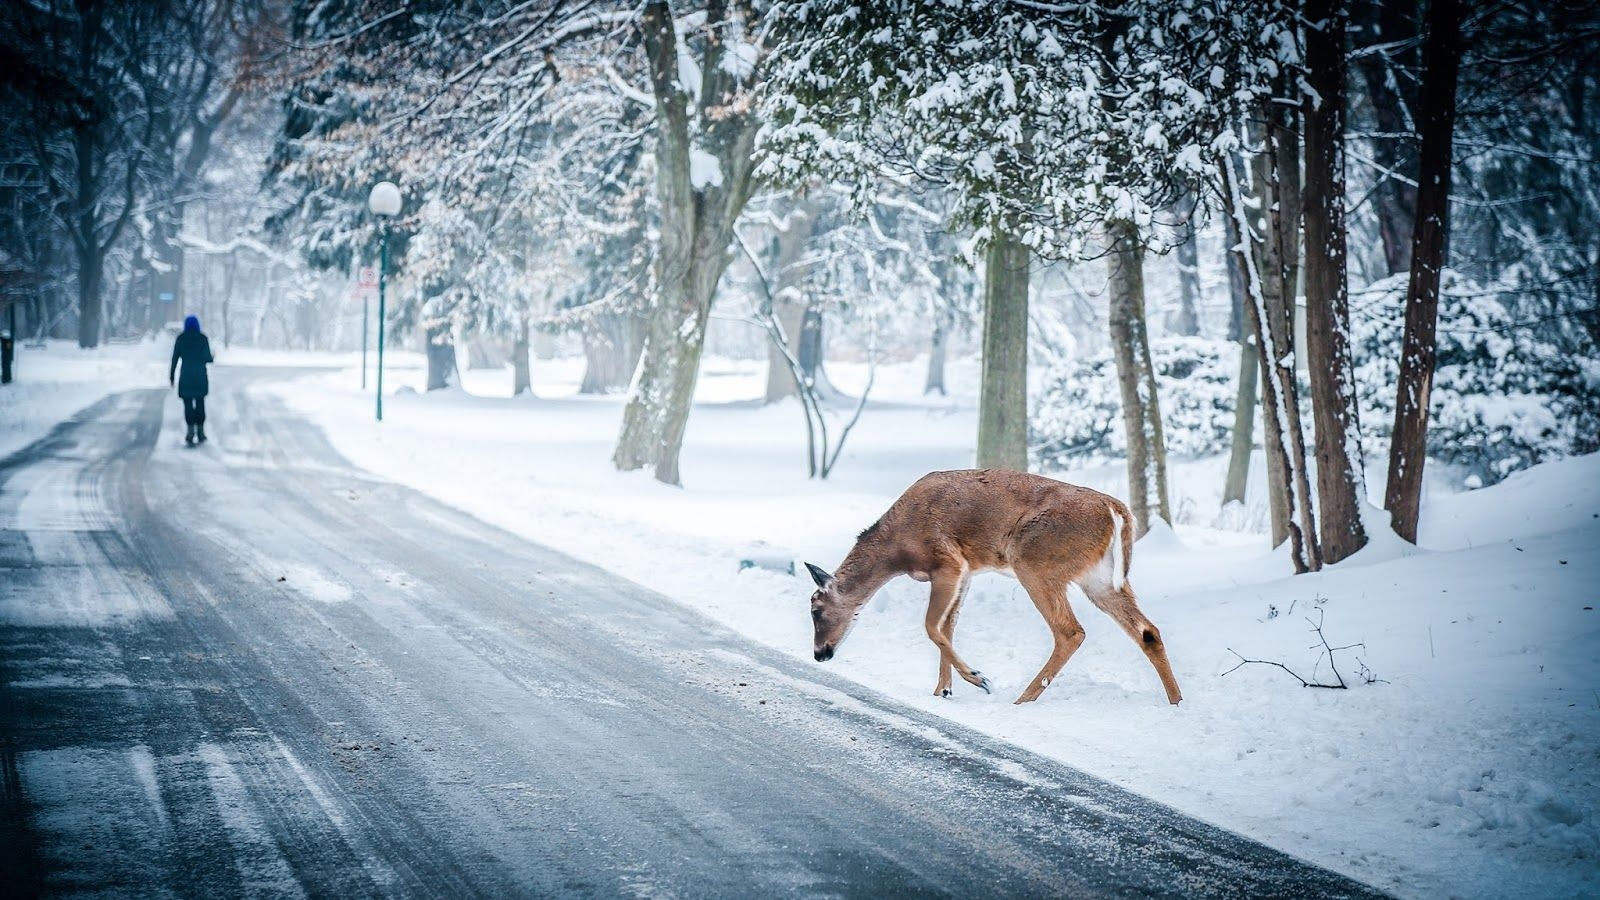 Full Hd Winter Animals Nature Wallpapers - Deer In Snowy Forest , HD Wallpaper & Backgrounds